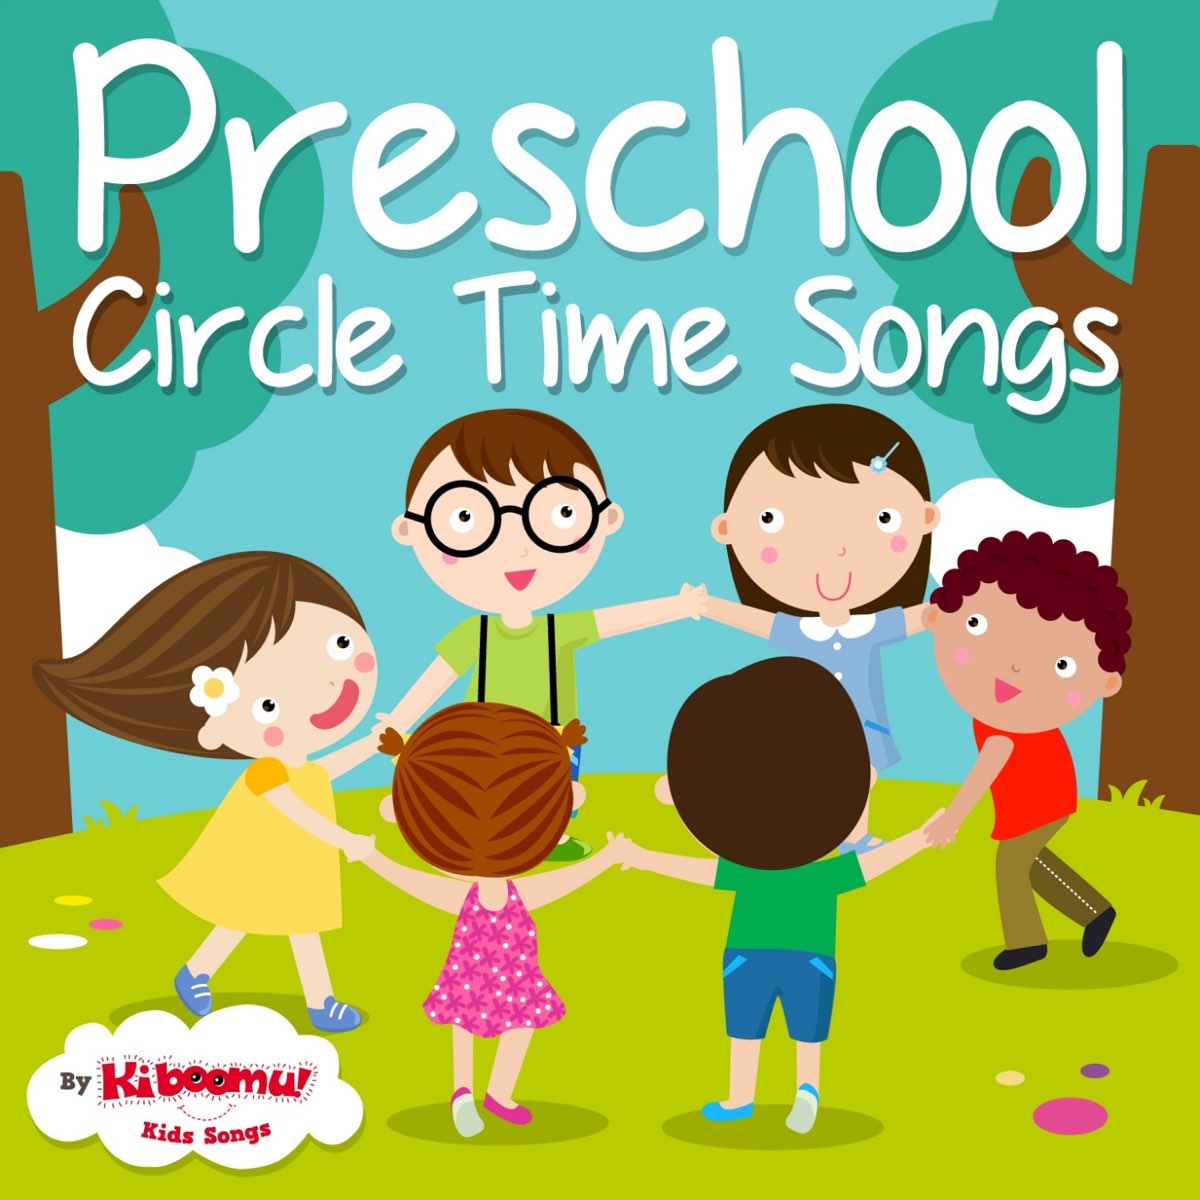 preschool-circle-time-songs-by-the-kiboomers-on-apple-music